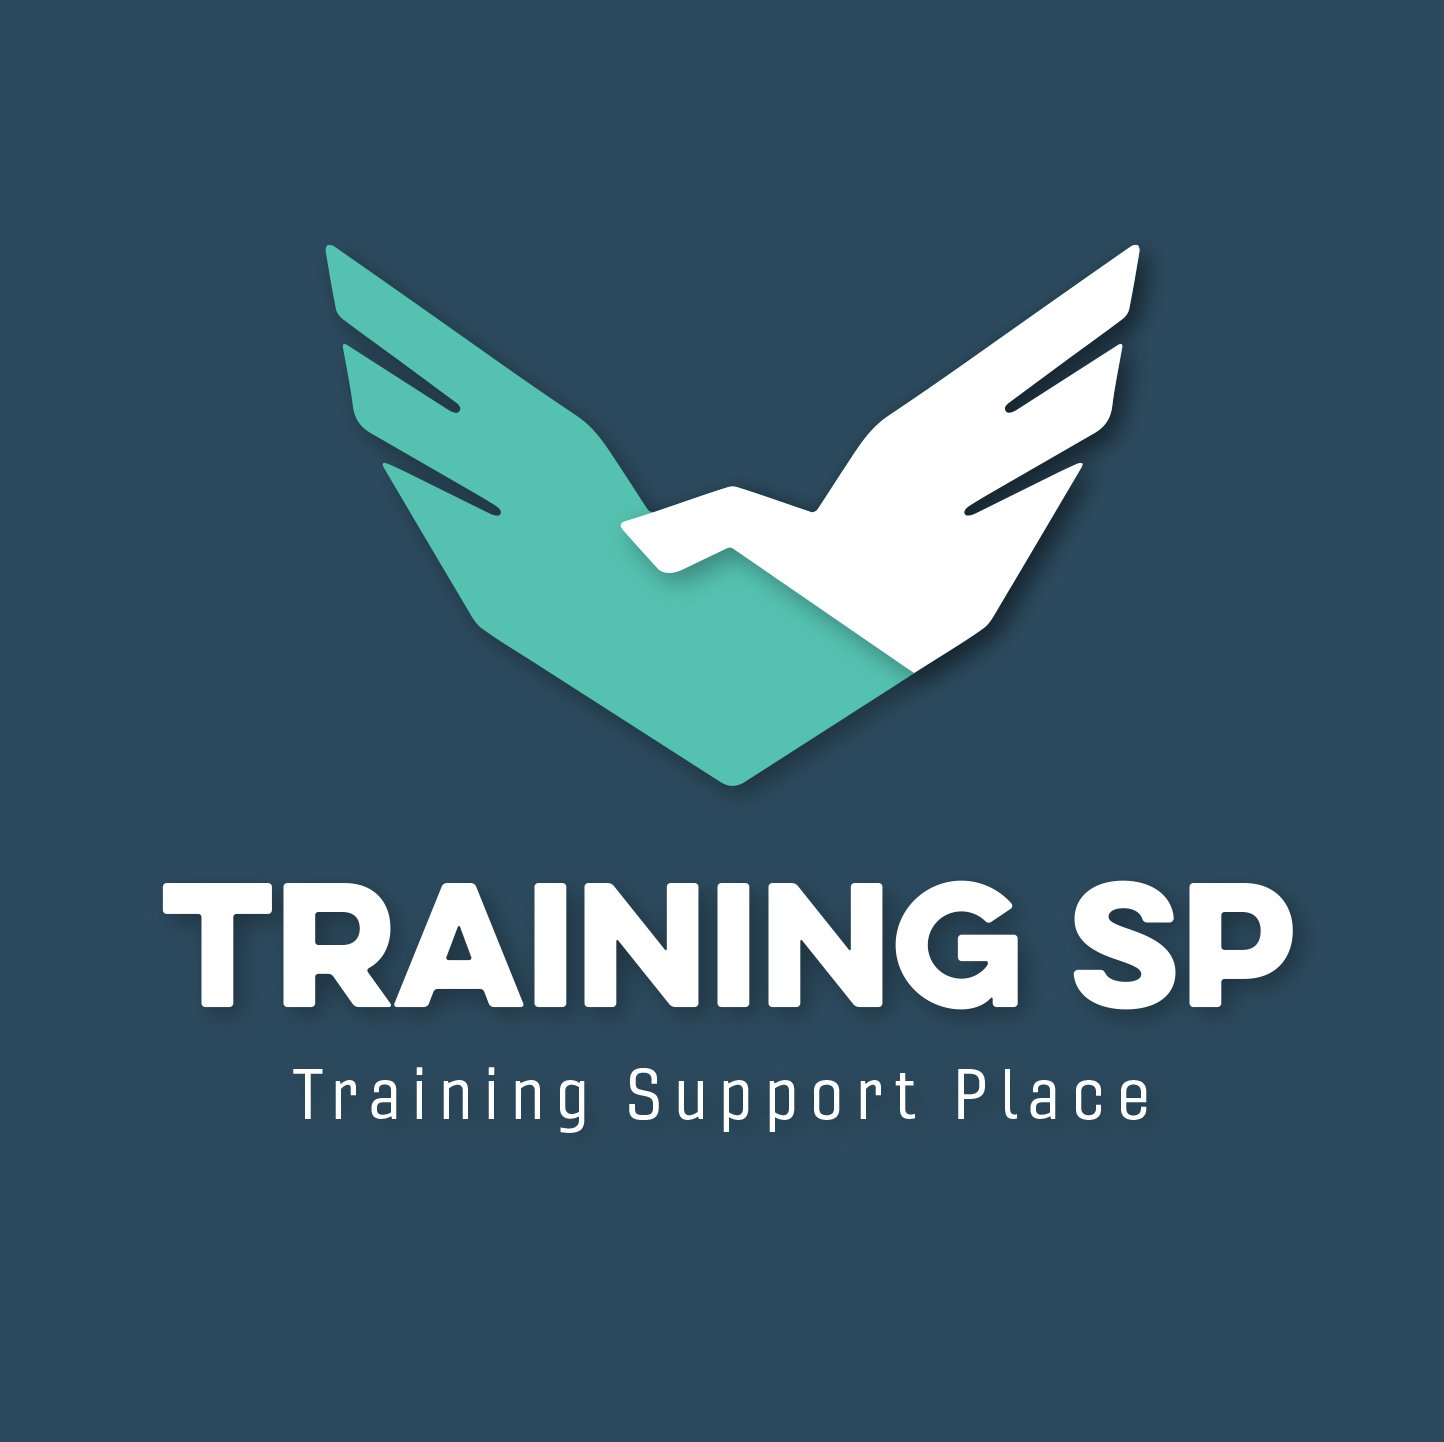 Training SP is a provider of training courses and support packages to the Retail and Hospitality sectors.